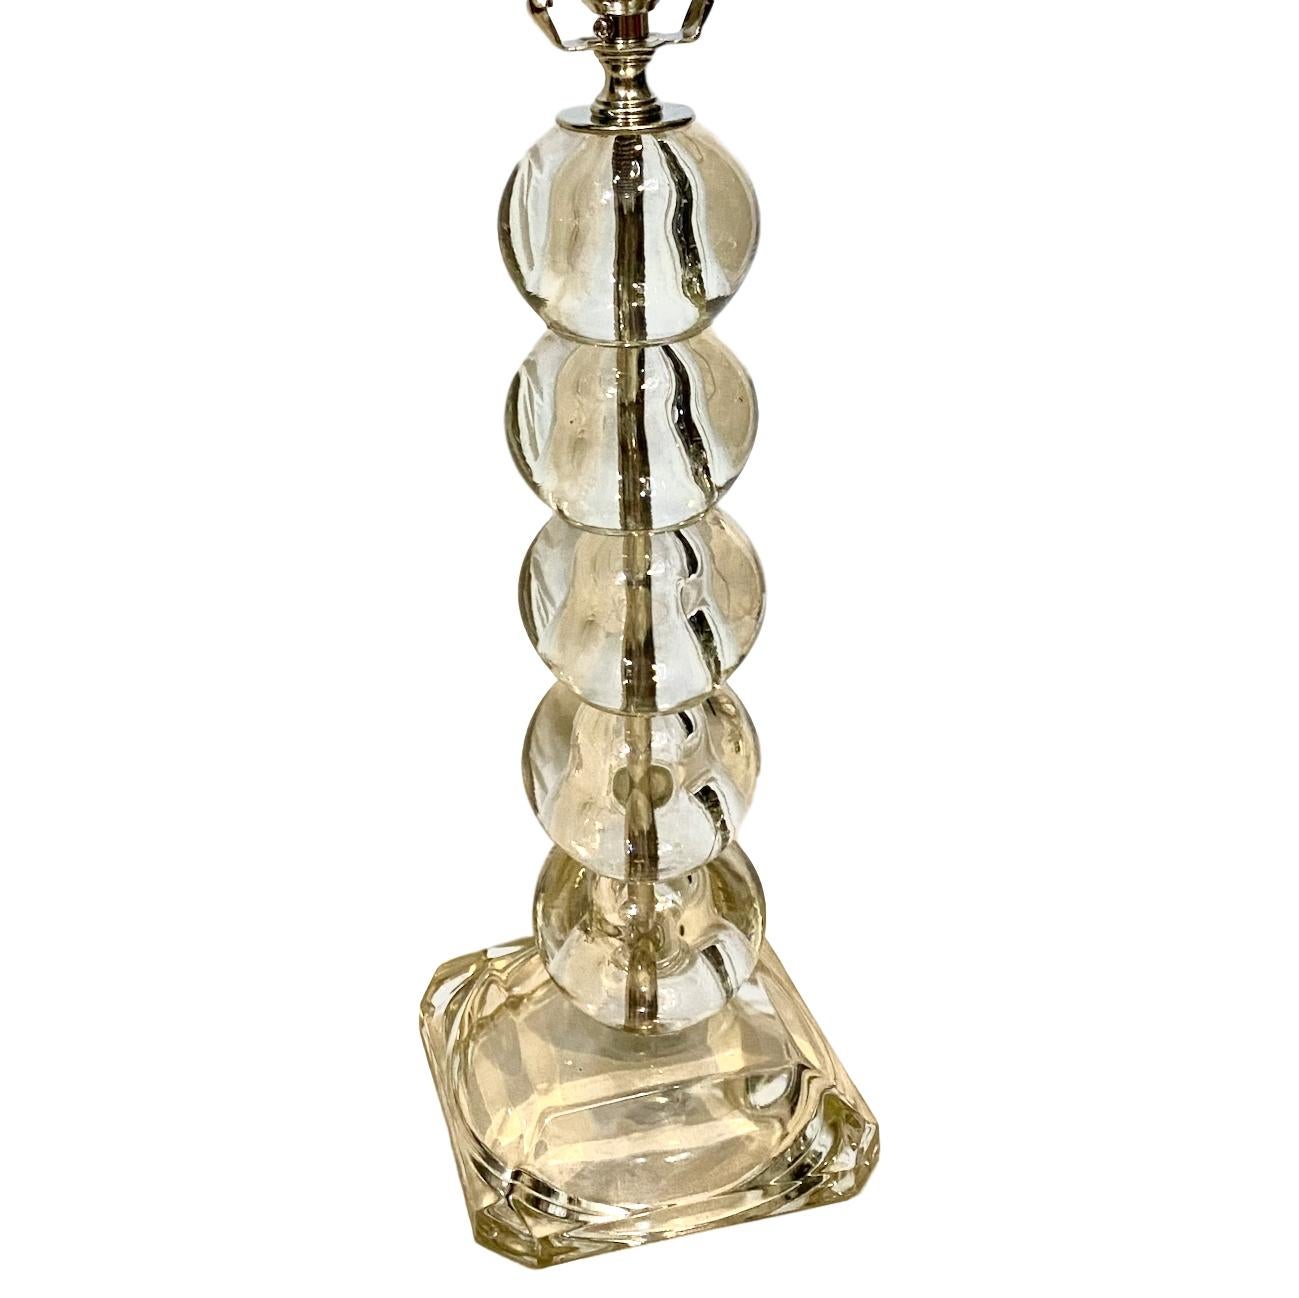 A circa 1920's French glass ball table lamp with square glass base.

Measurements:
Height of body: 13.5